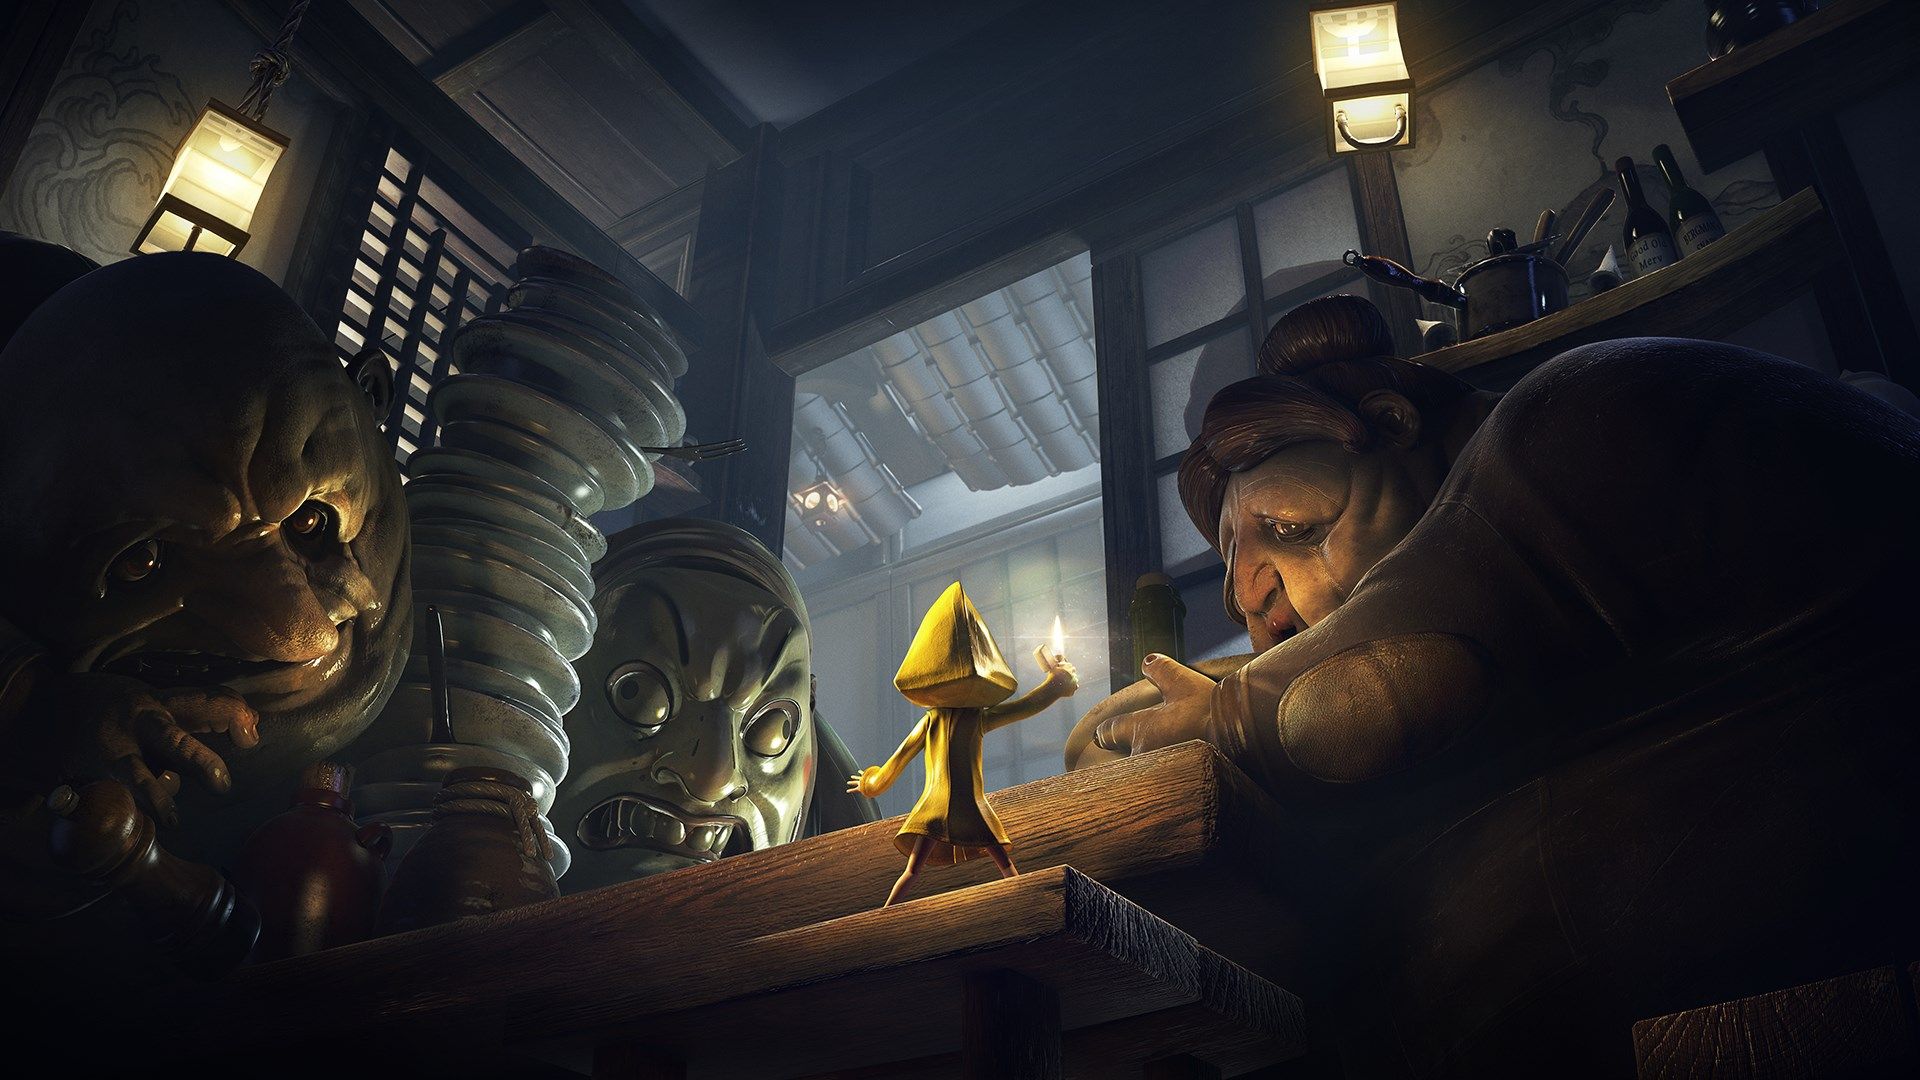 Revisiting Little Nightmares